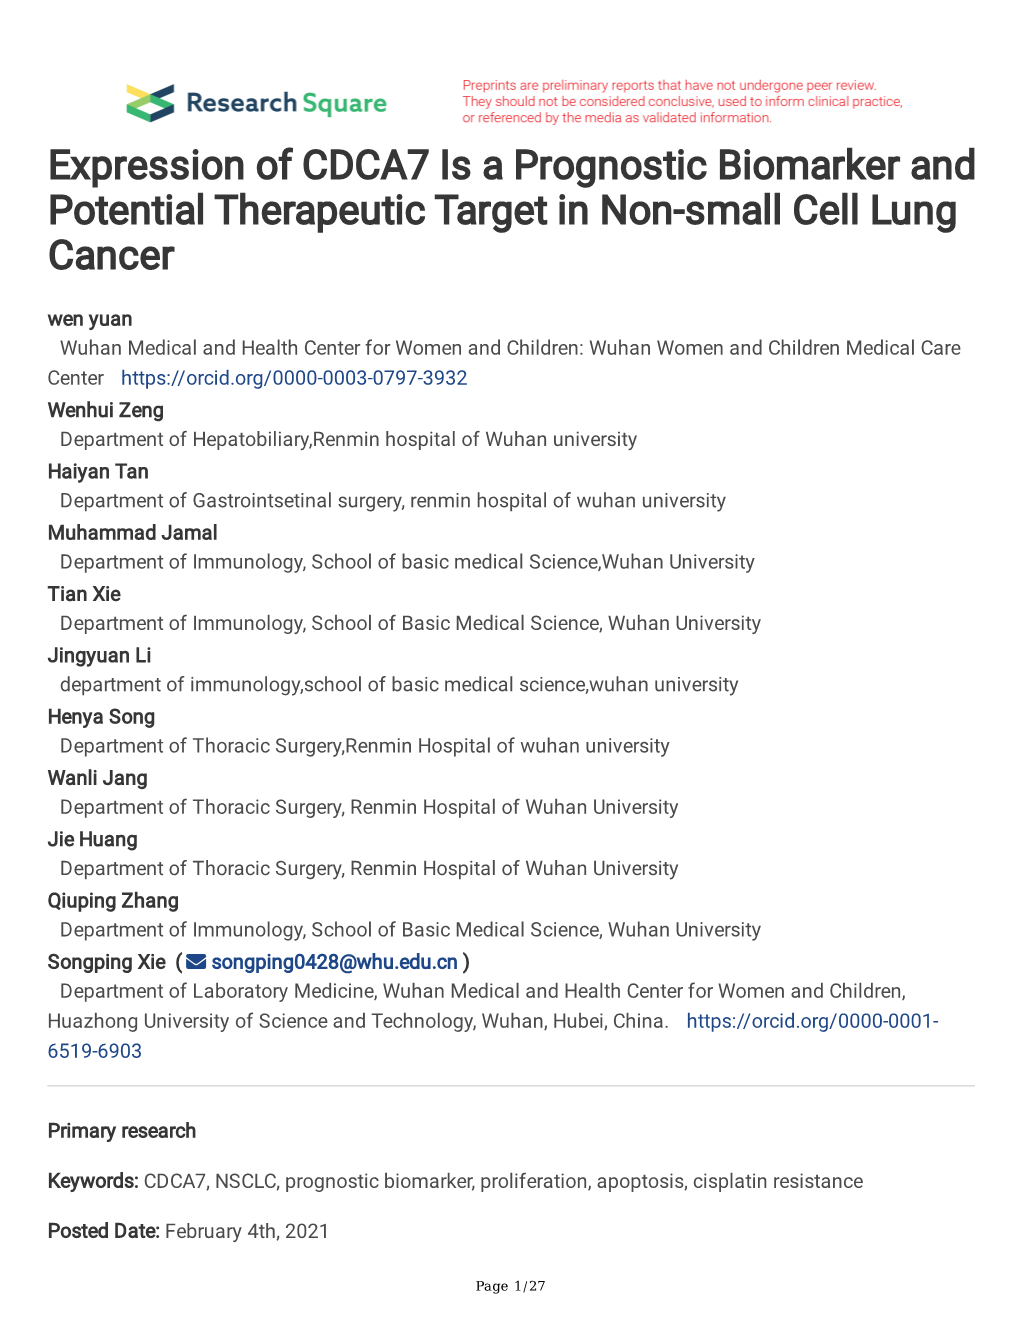 Expression of CDCA7 Is a Prognostic Biomarker and Potential Therapeutic Target in Non-Small Cell Lung Cancer